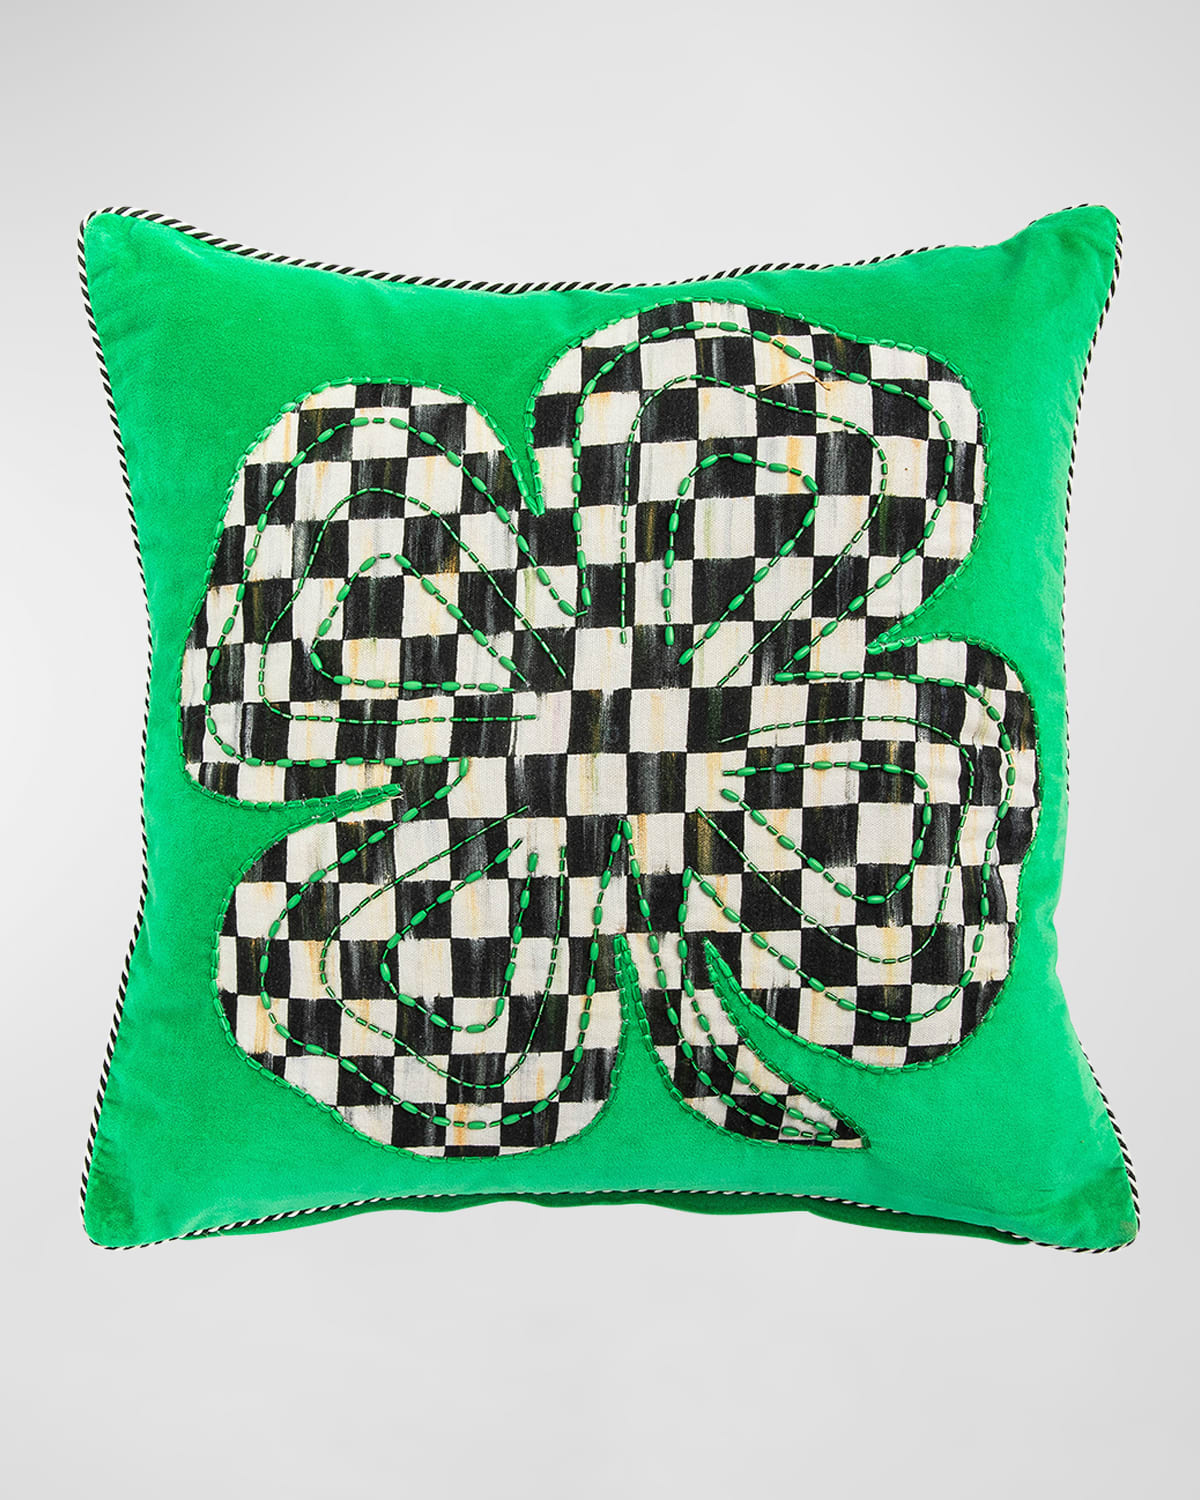 Mackenzie-childs Courtly Clover Pillow In Multi